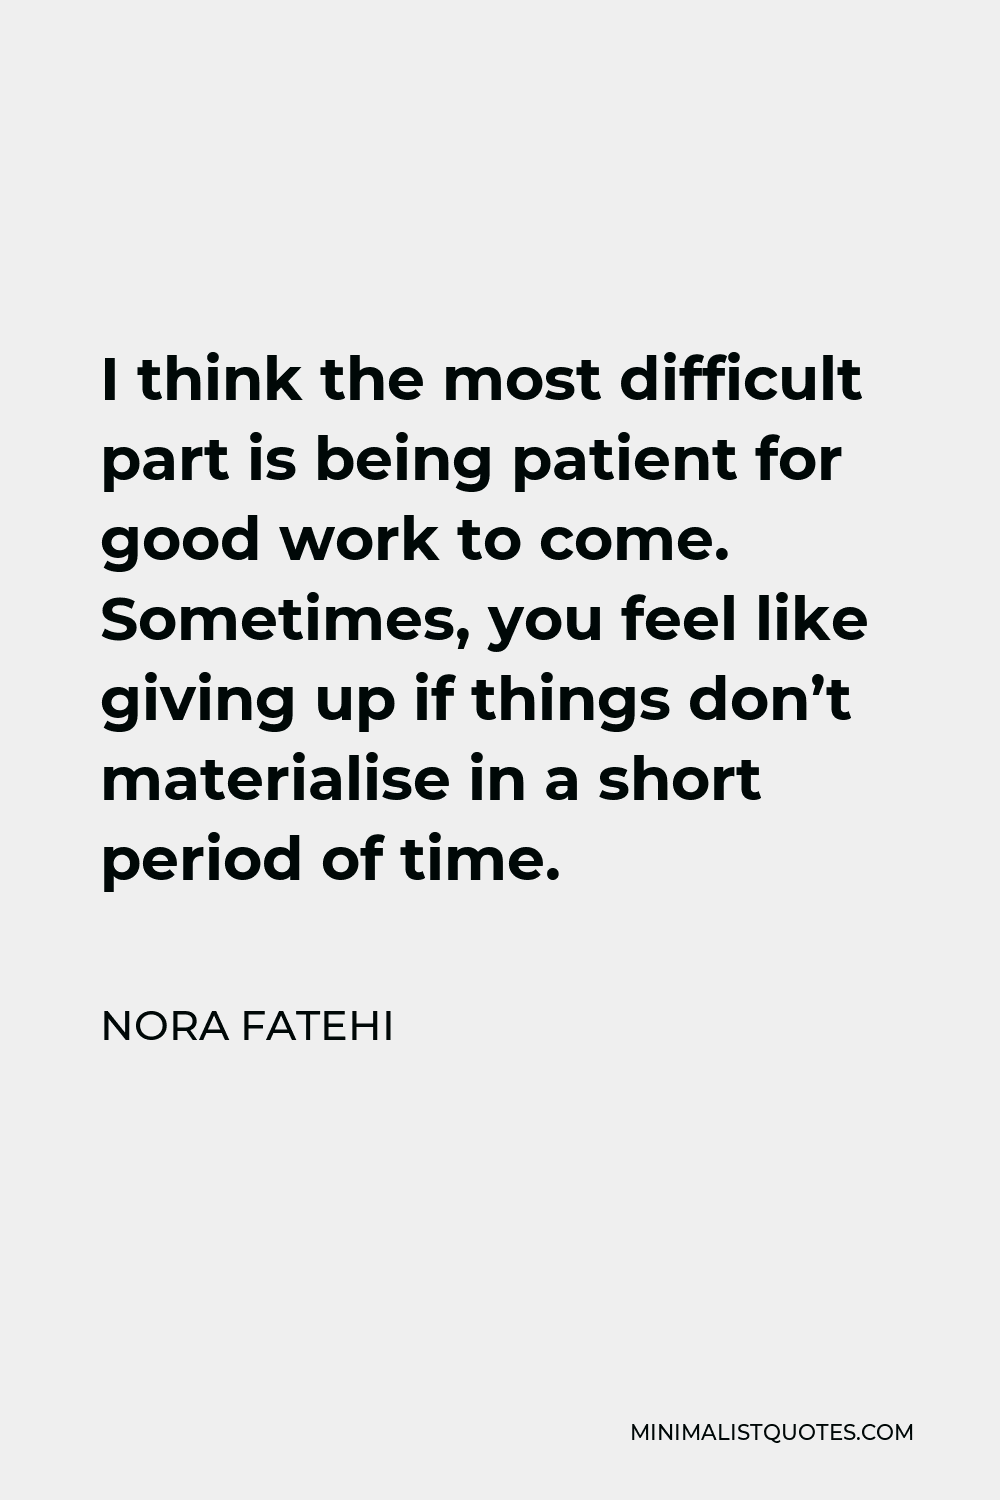 Nora Fatehi Quote - I think the most difficult part is being patient for good work to come. Sometimes, you feel like giving up if things don’t materialise in a short period of time.